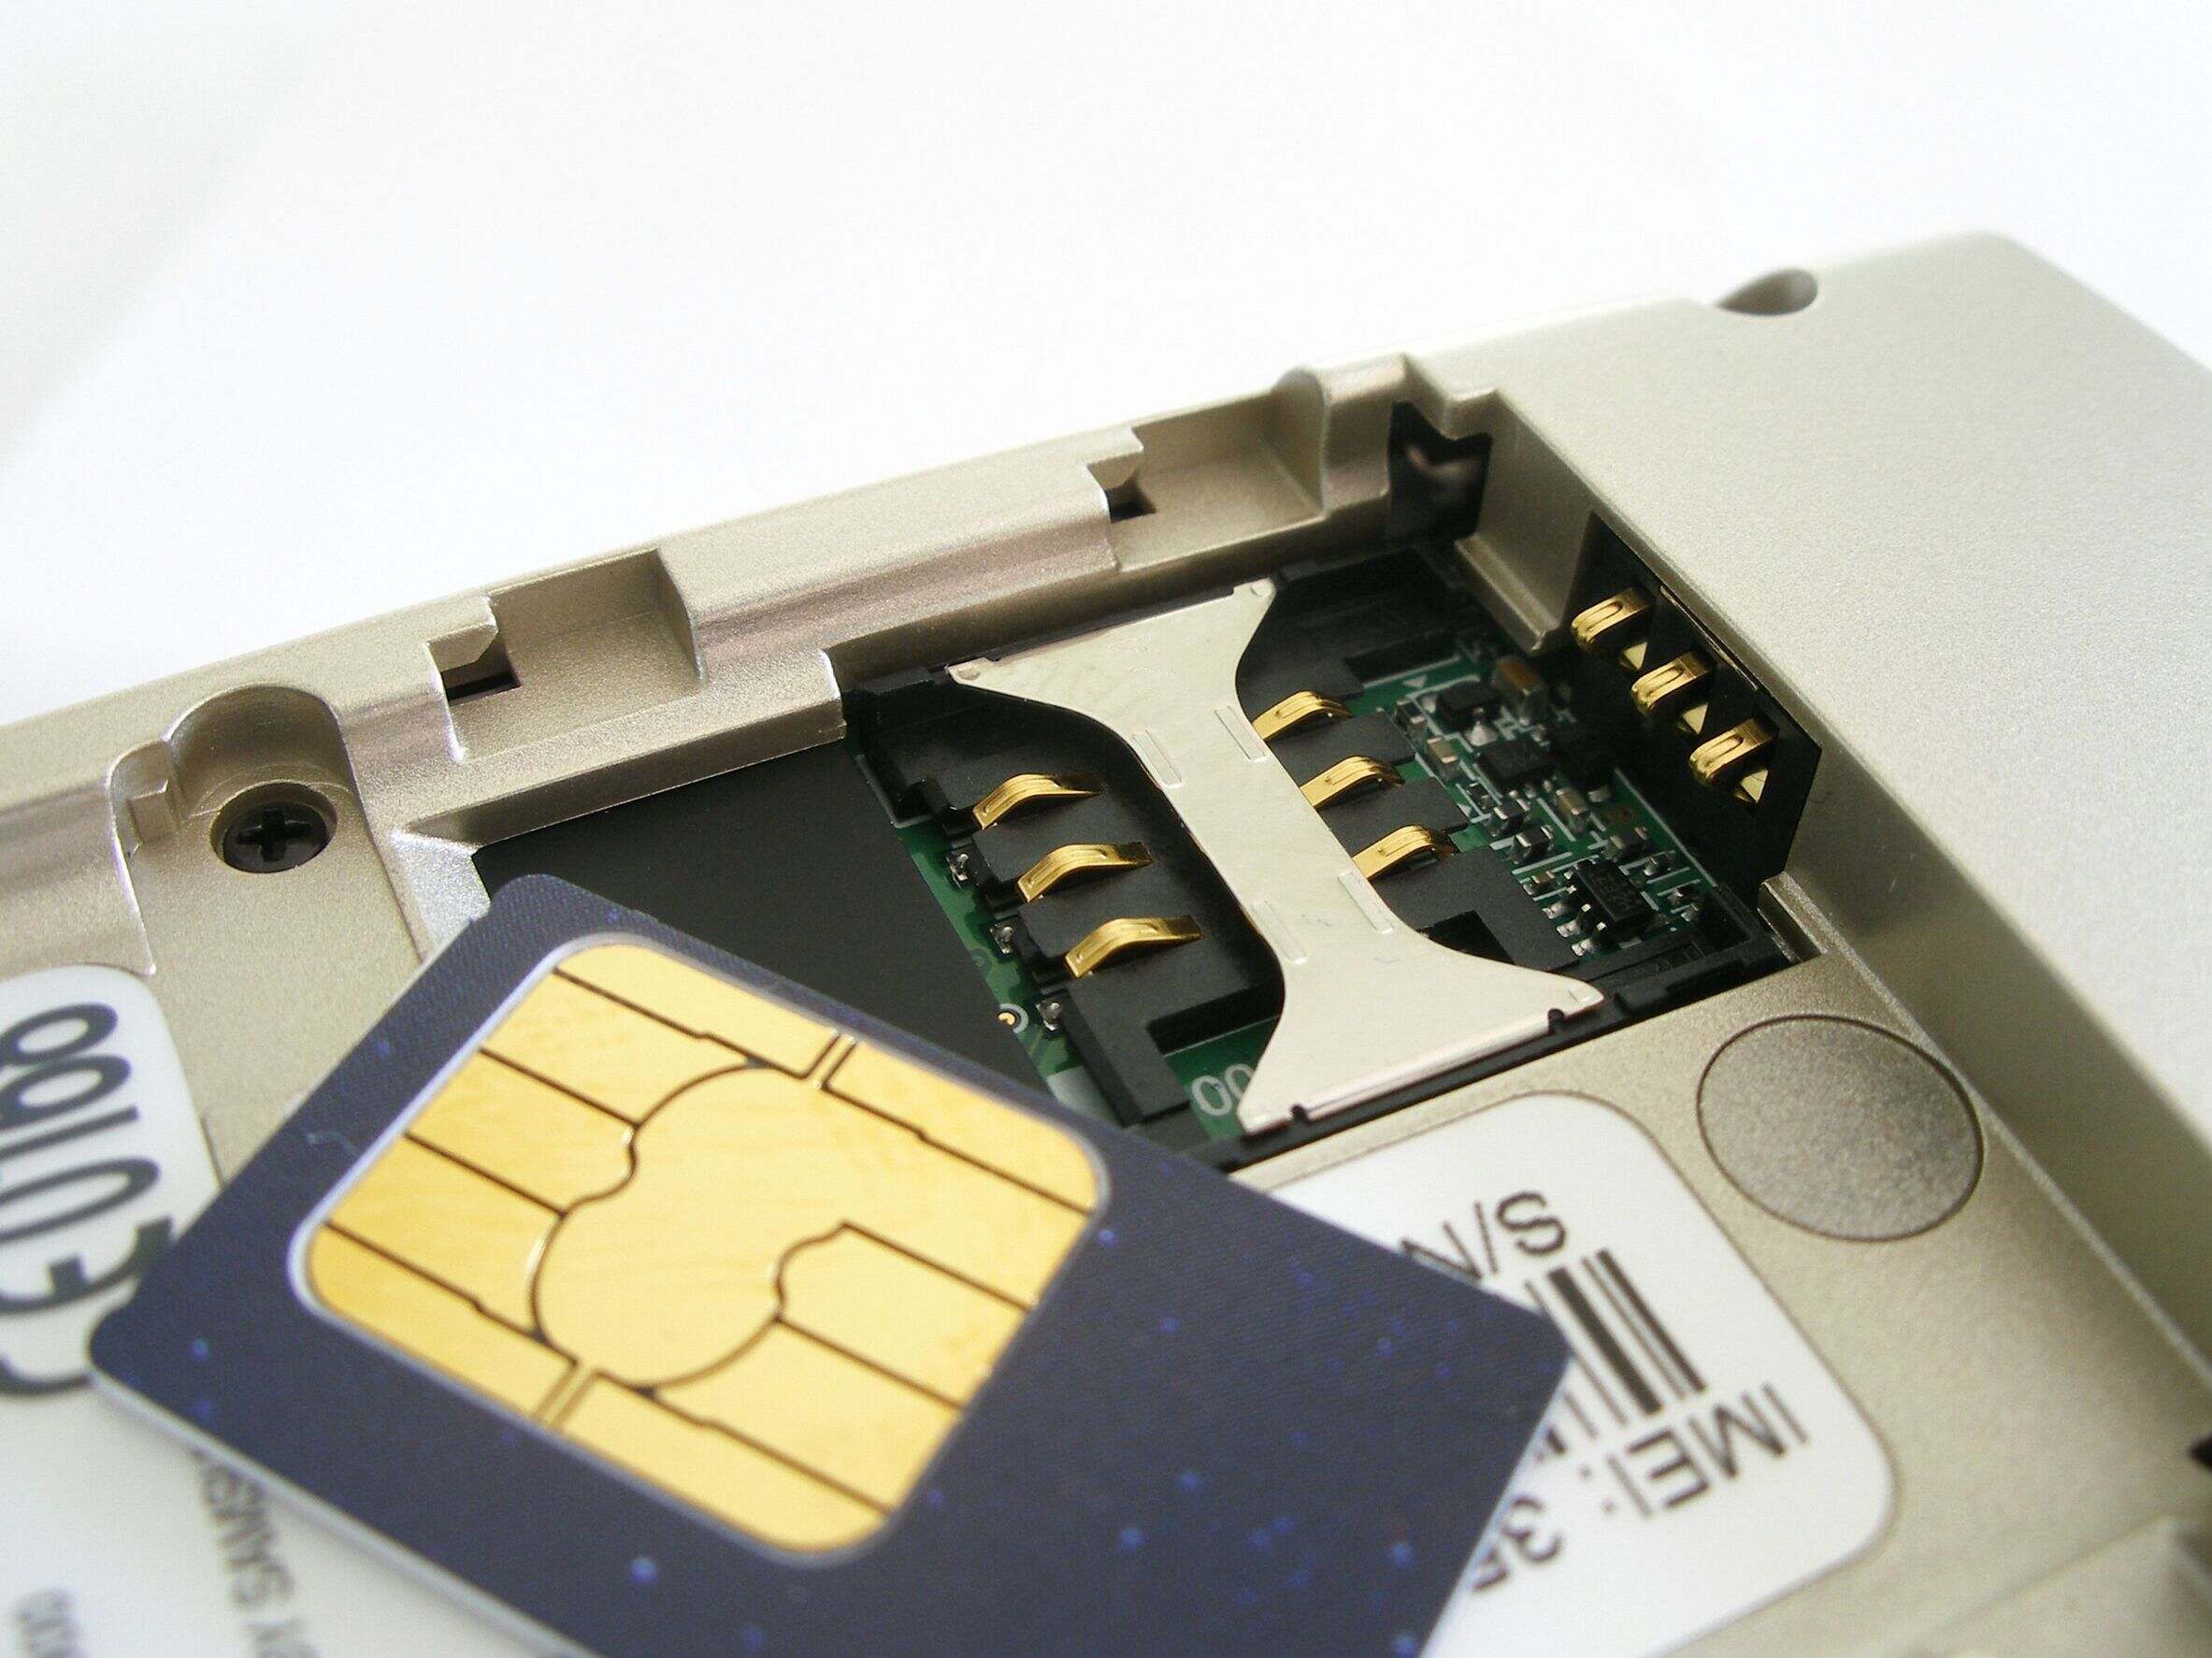 locating-the-imei-number-on-a-sim-card-quick-guide